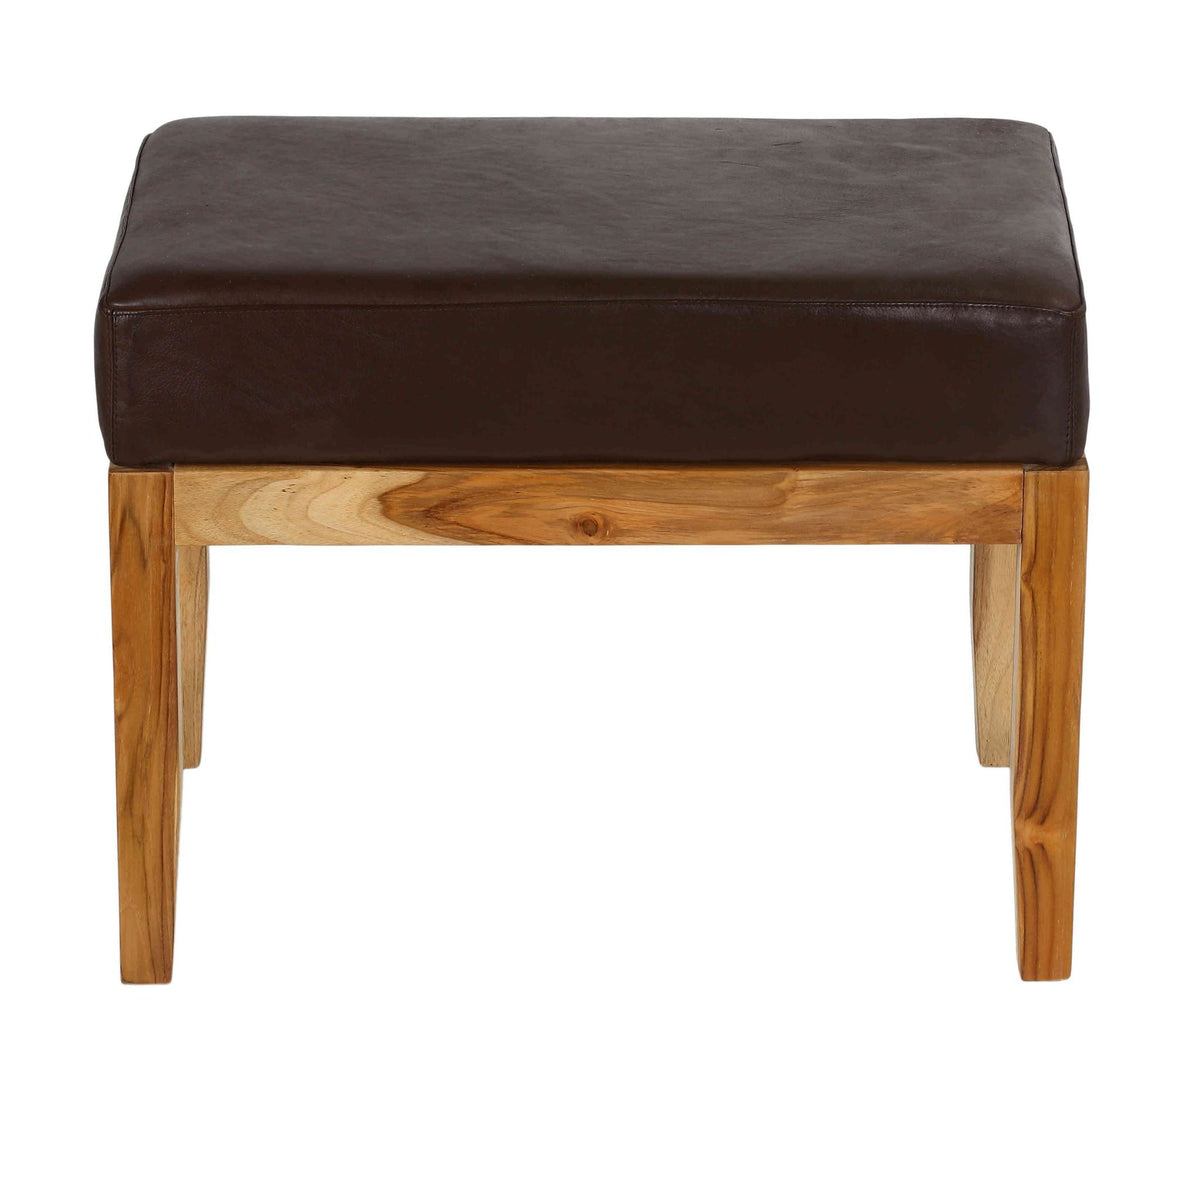 Bare Decor Luisa Bench Genuine 100% Leather and Teak, Brown